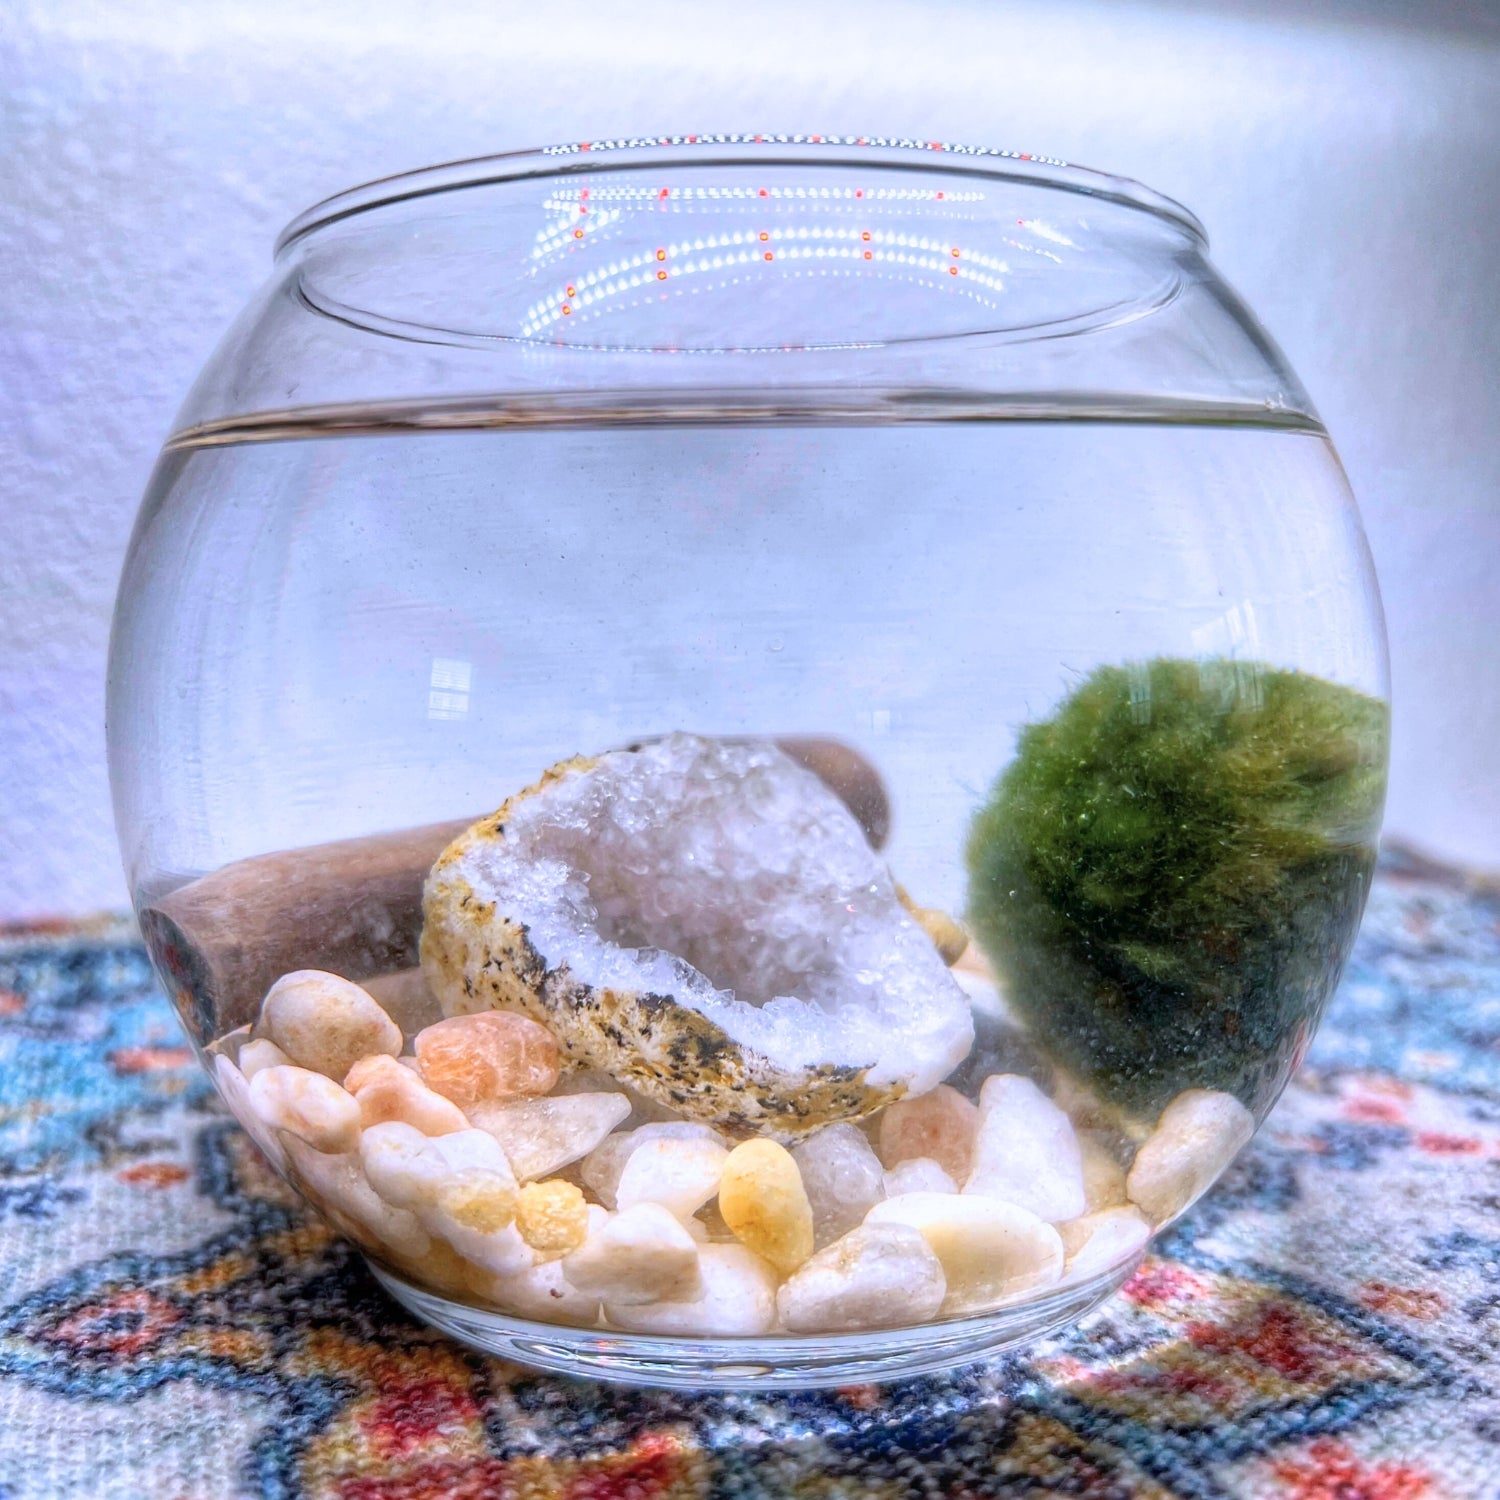 Overhead view of an open glass aquarium with a single green Marimo Moss Ball, a beige spiral shell, driftwood, and white and yellow pebbles on a vibrant textile.